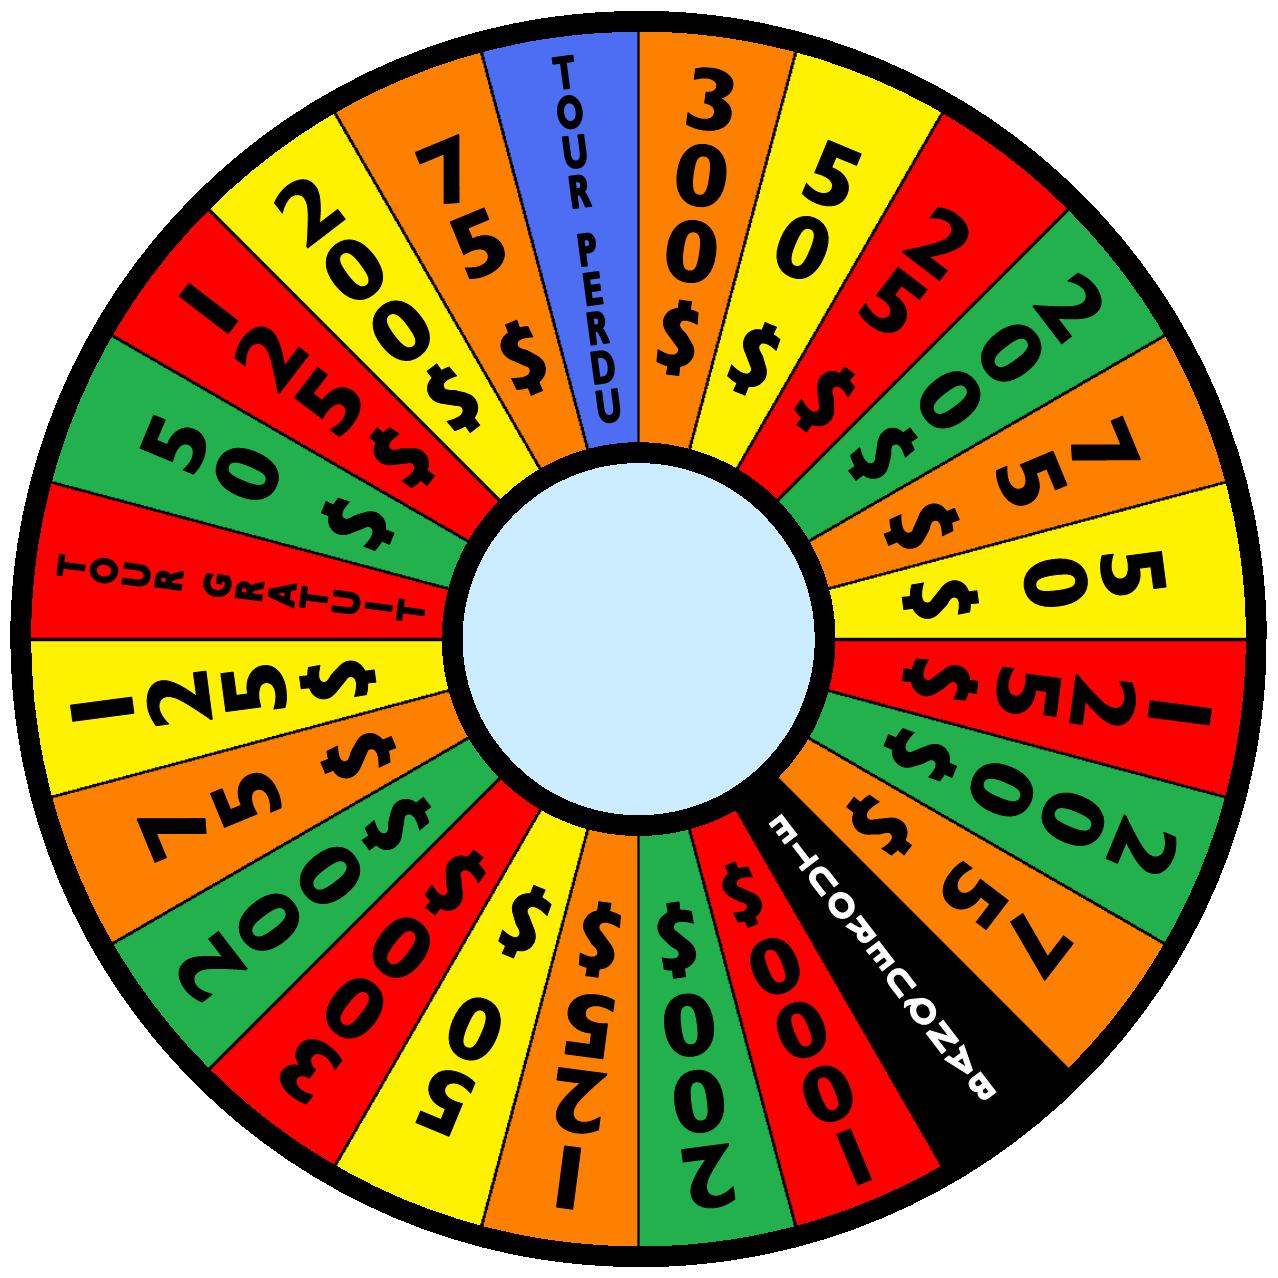 La Roue Chanceuse Game by germanname